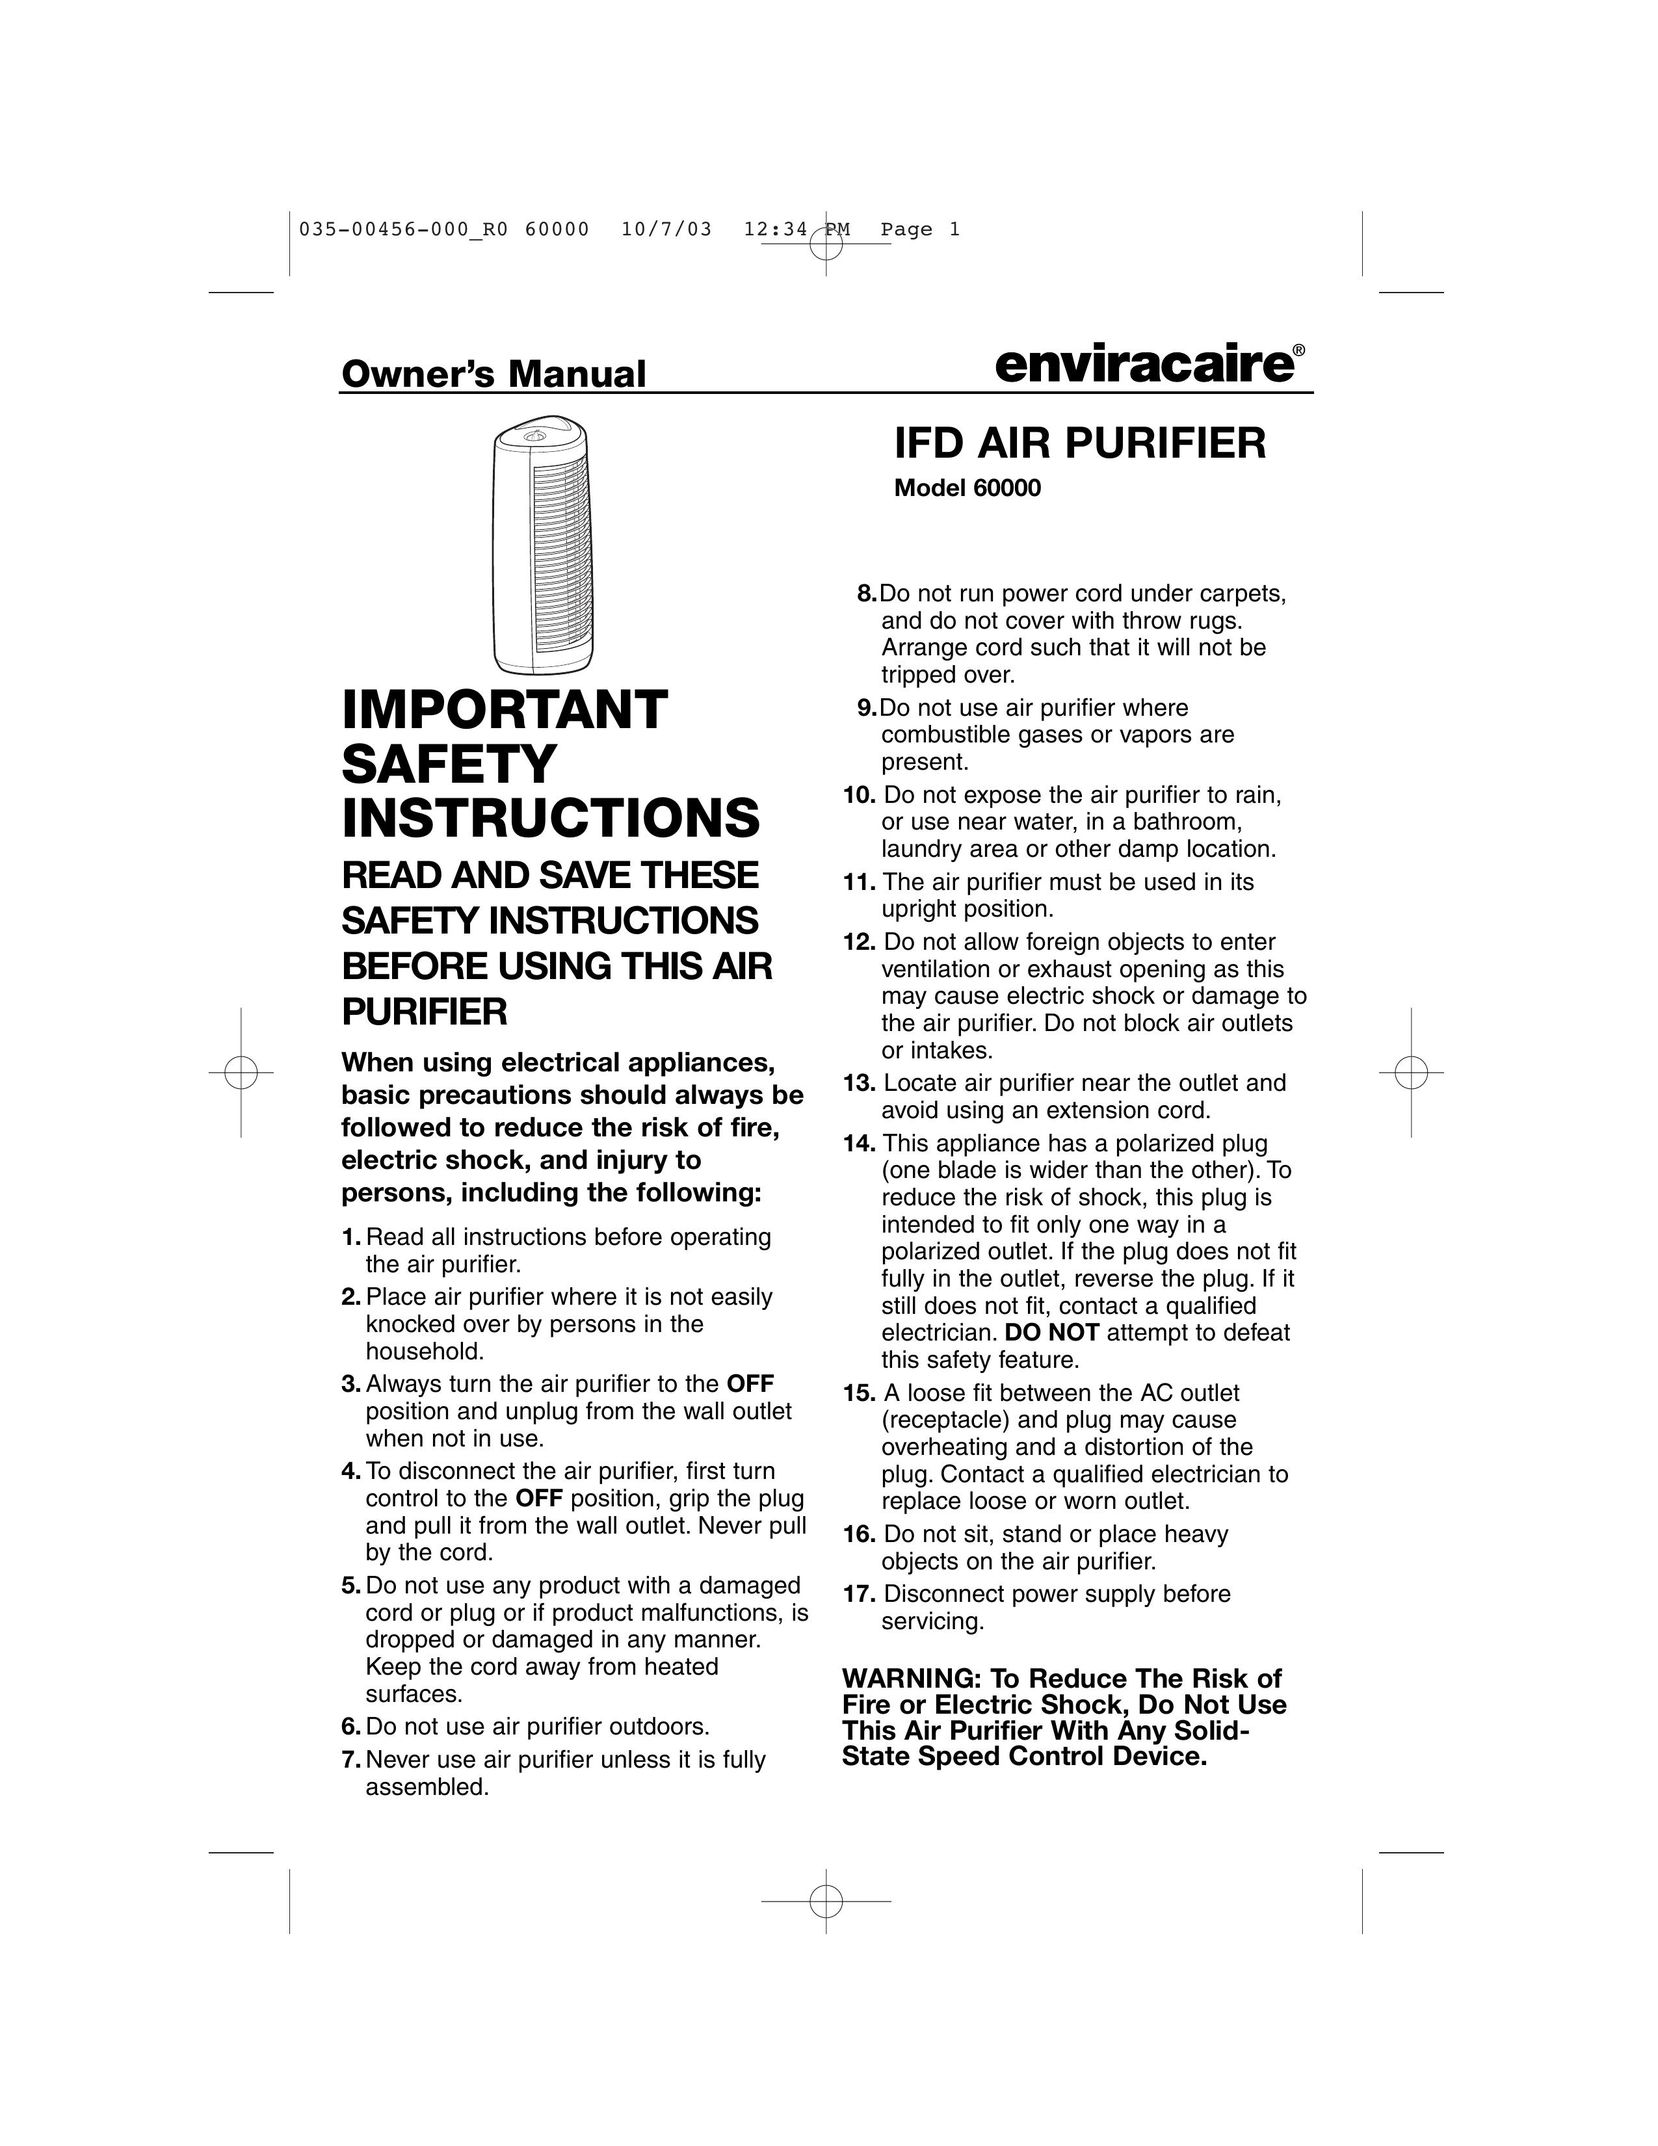 Enviracaire 60000 Air Cleaner User Manual (Page 1)